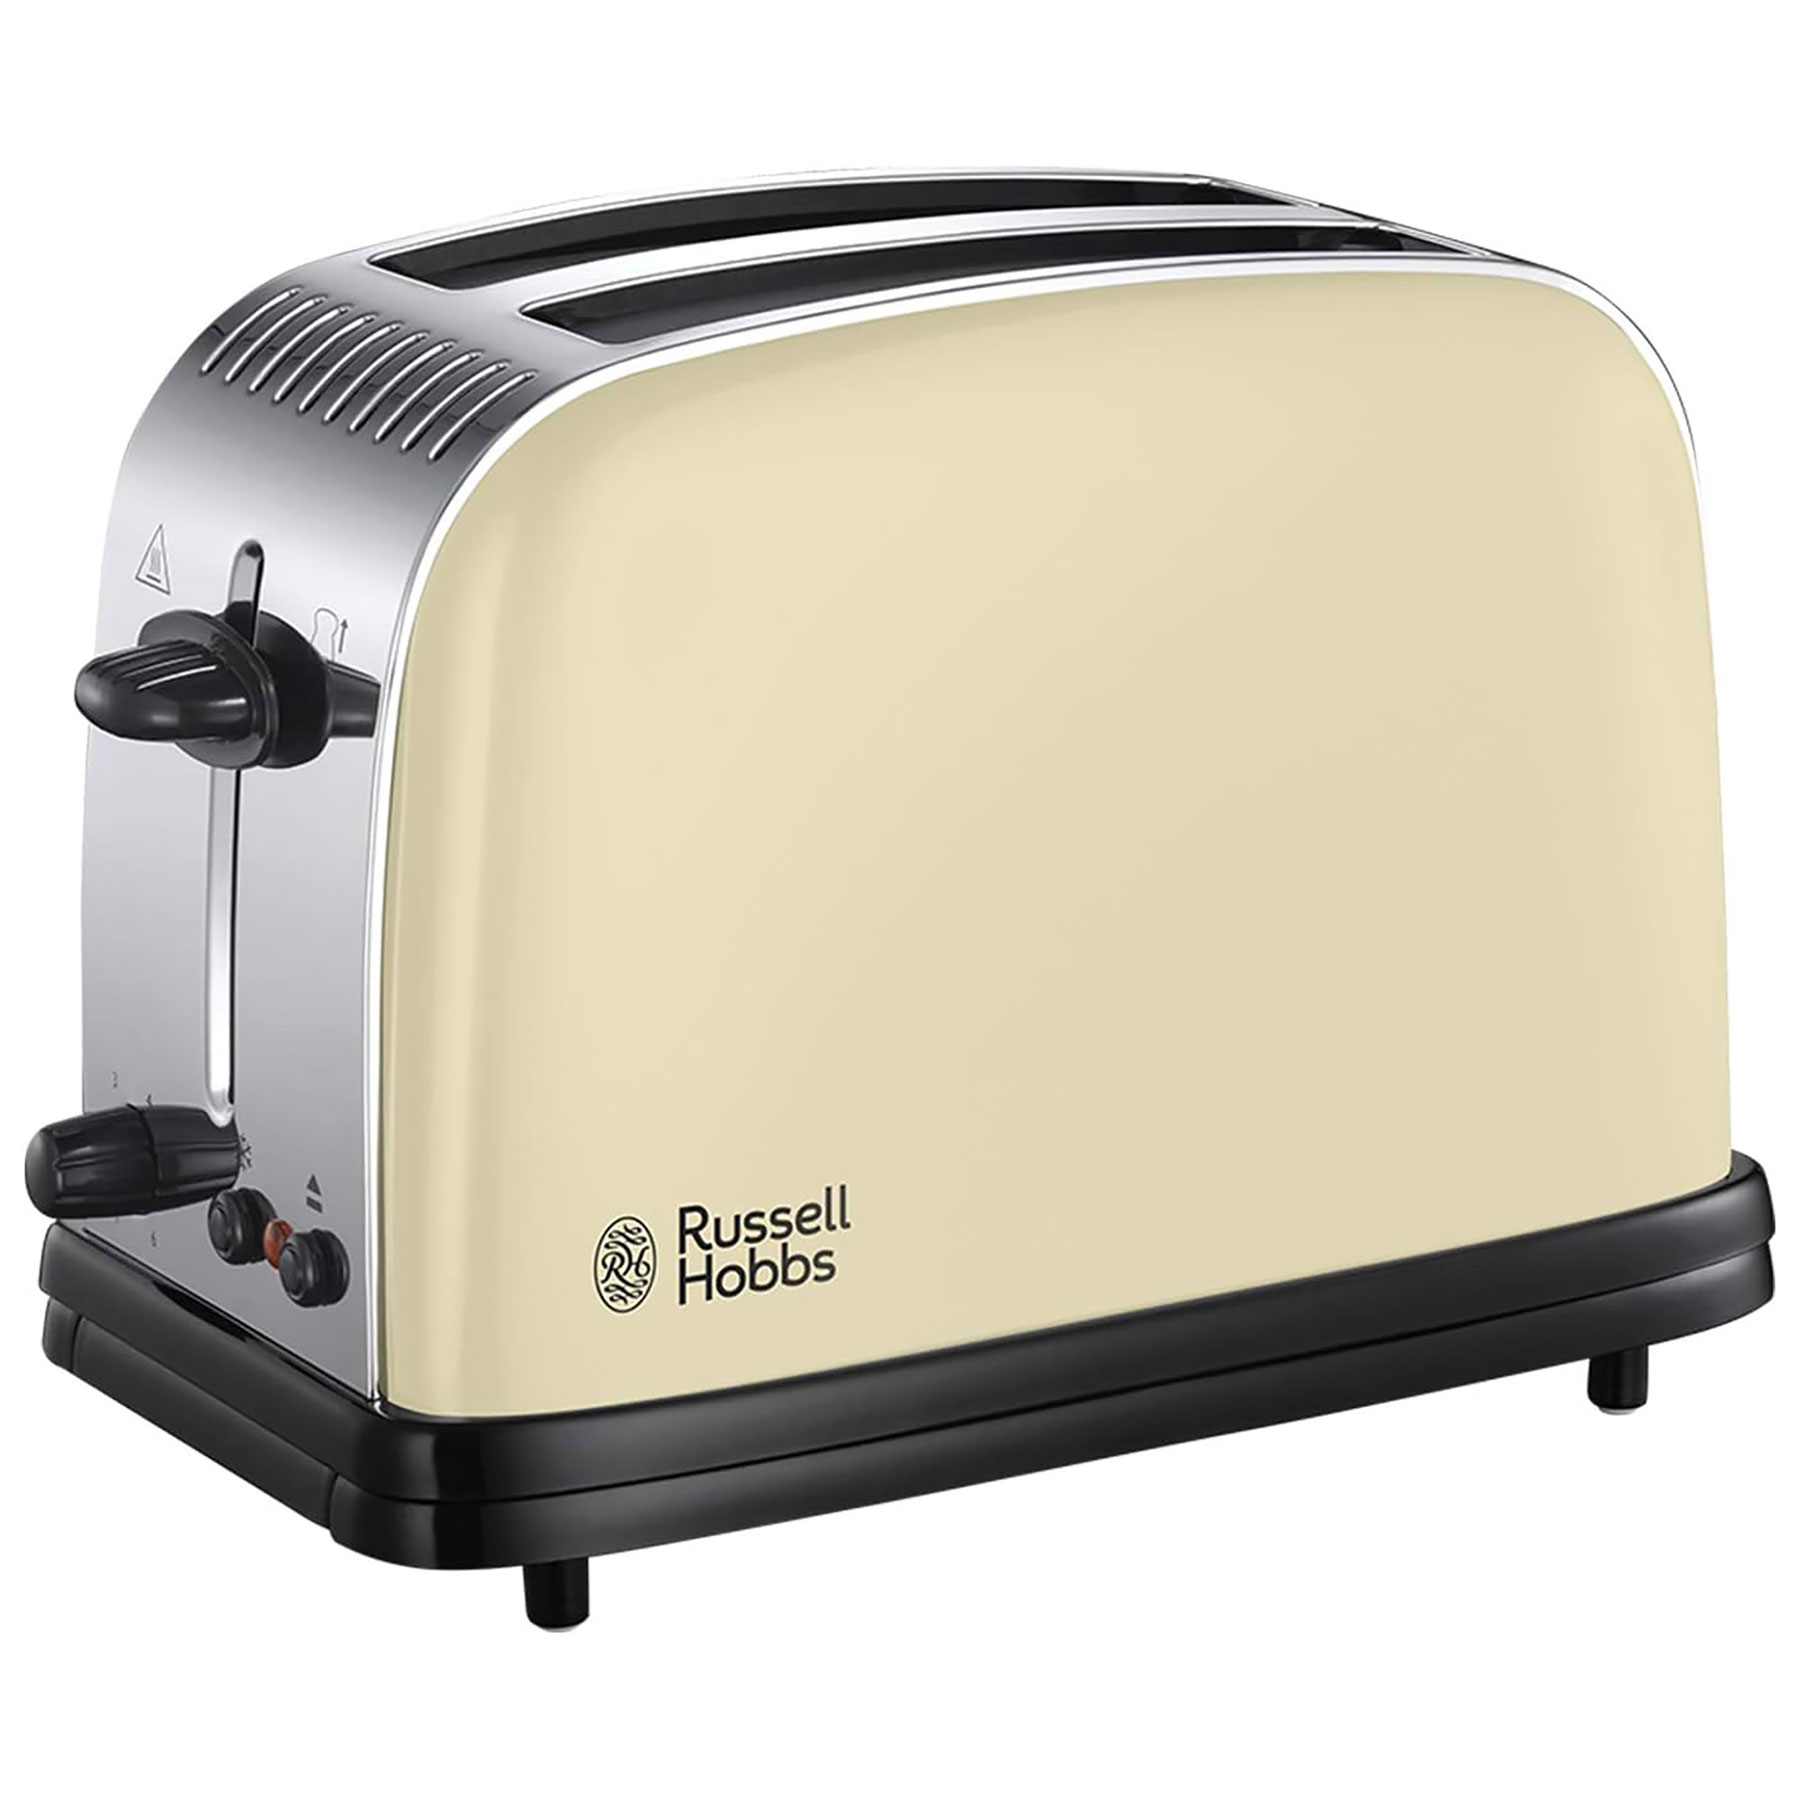 Image of Russell Hobbs 23334 Colours Plus 2 Slice Toaster in Cream